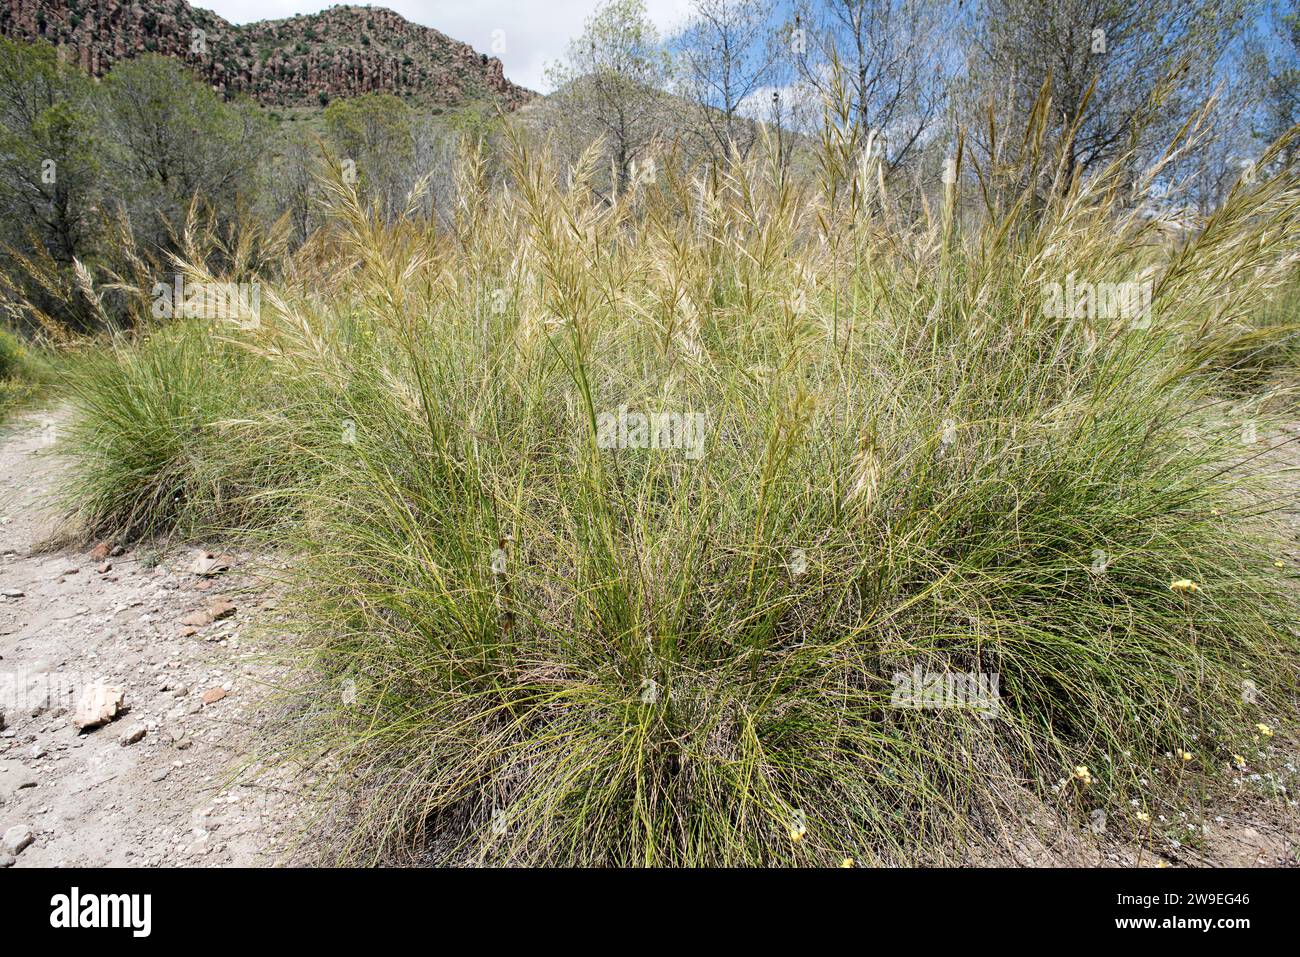 Esparto (Stipa tenacissima) is a perennial herb endemic to South Iberian Peninsula and north Africa. Produces a fiber used to manufacture basketry and Stock Photo